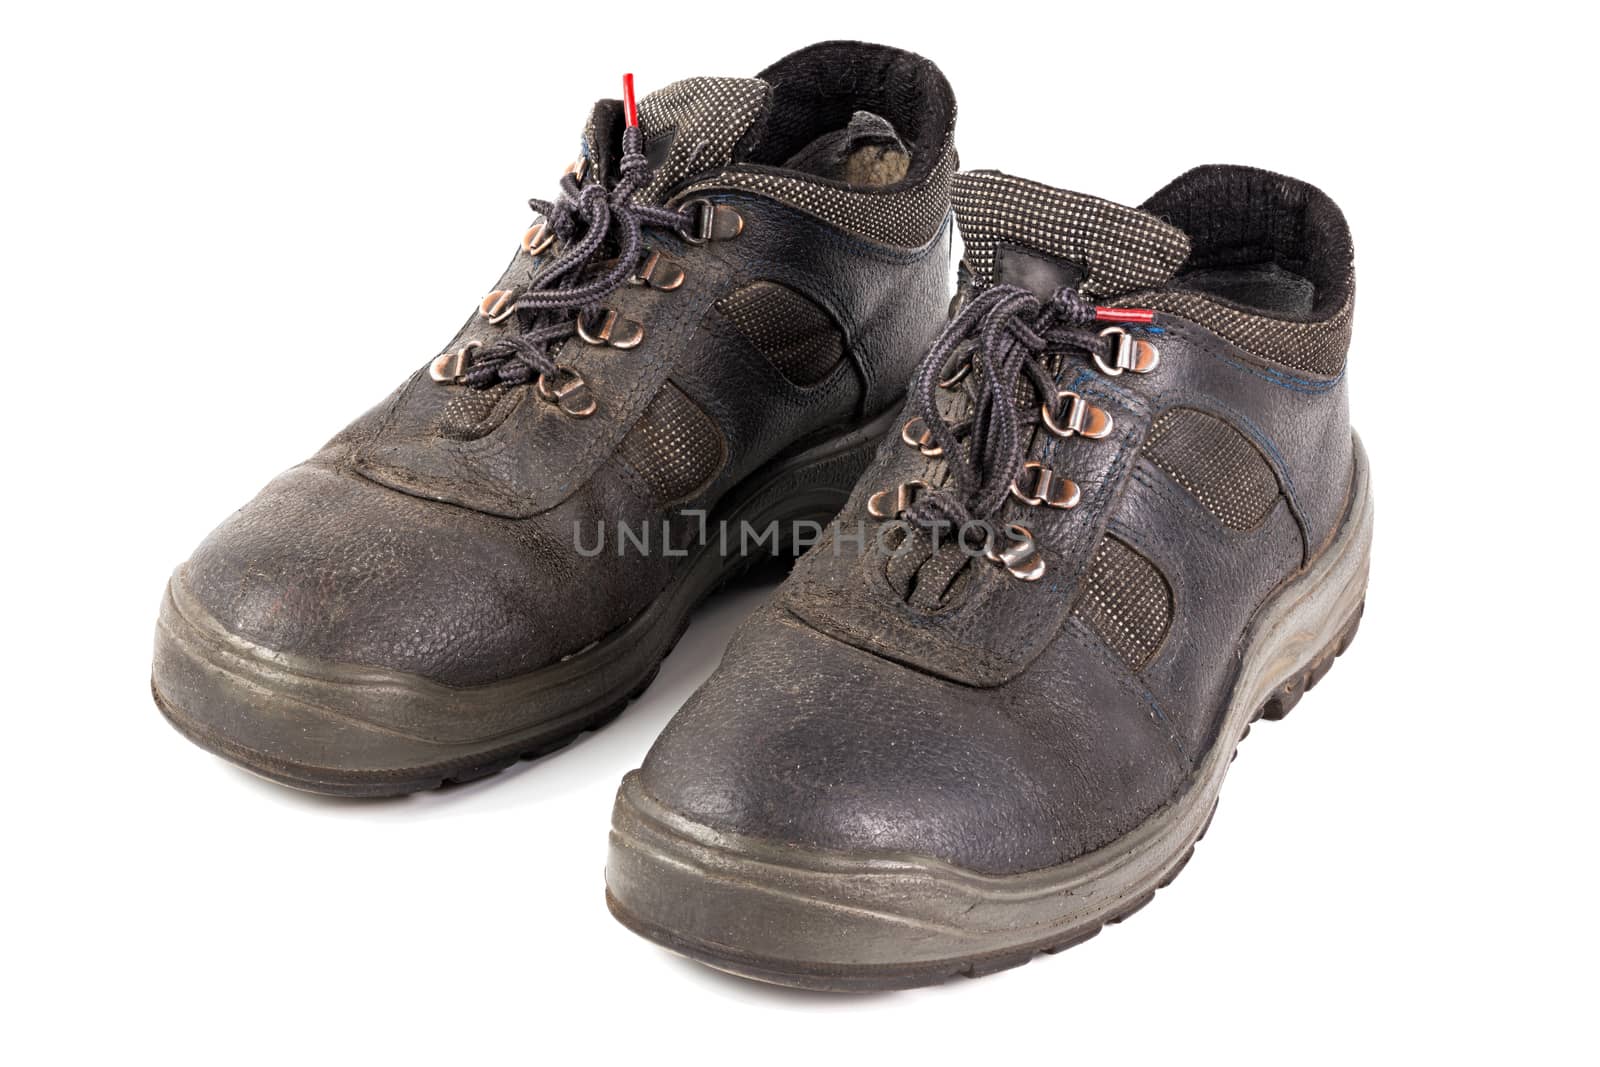 a pair of used blue leather work shoes with fabric incuts isolated on white background.